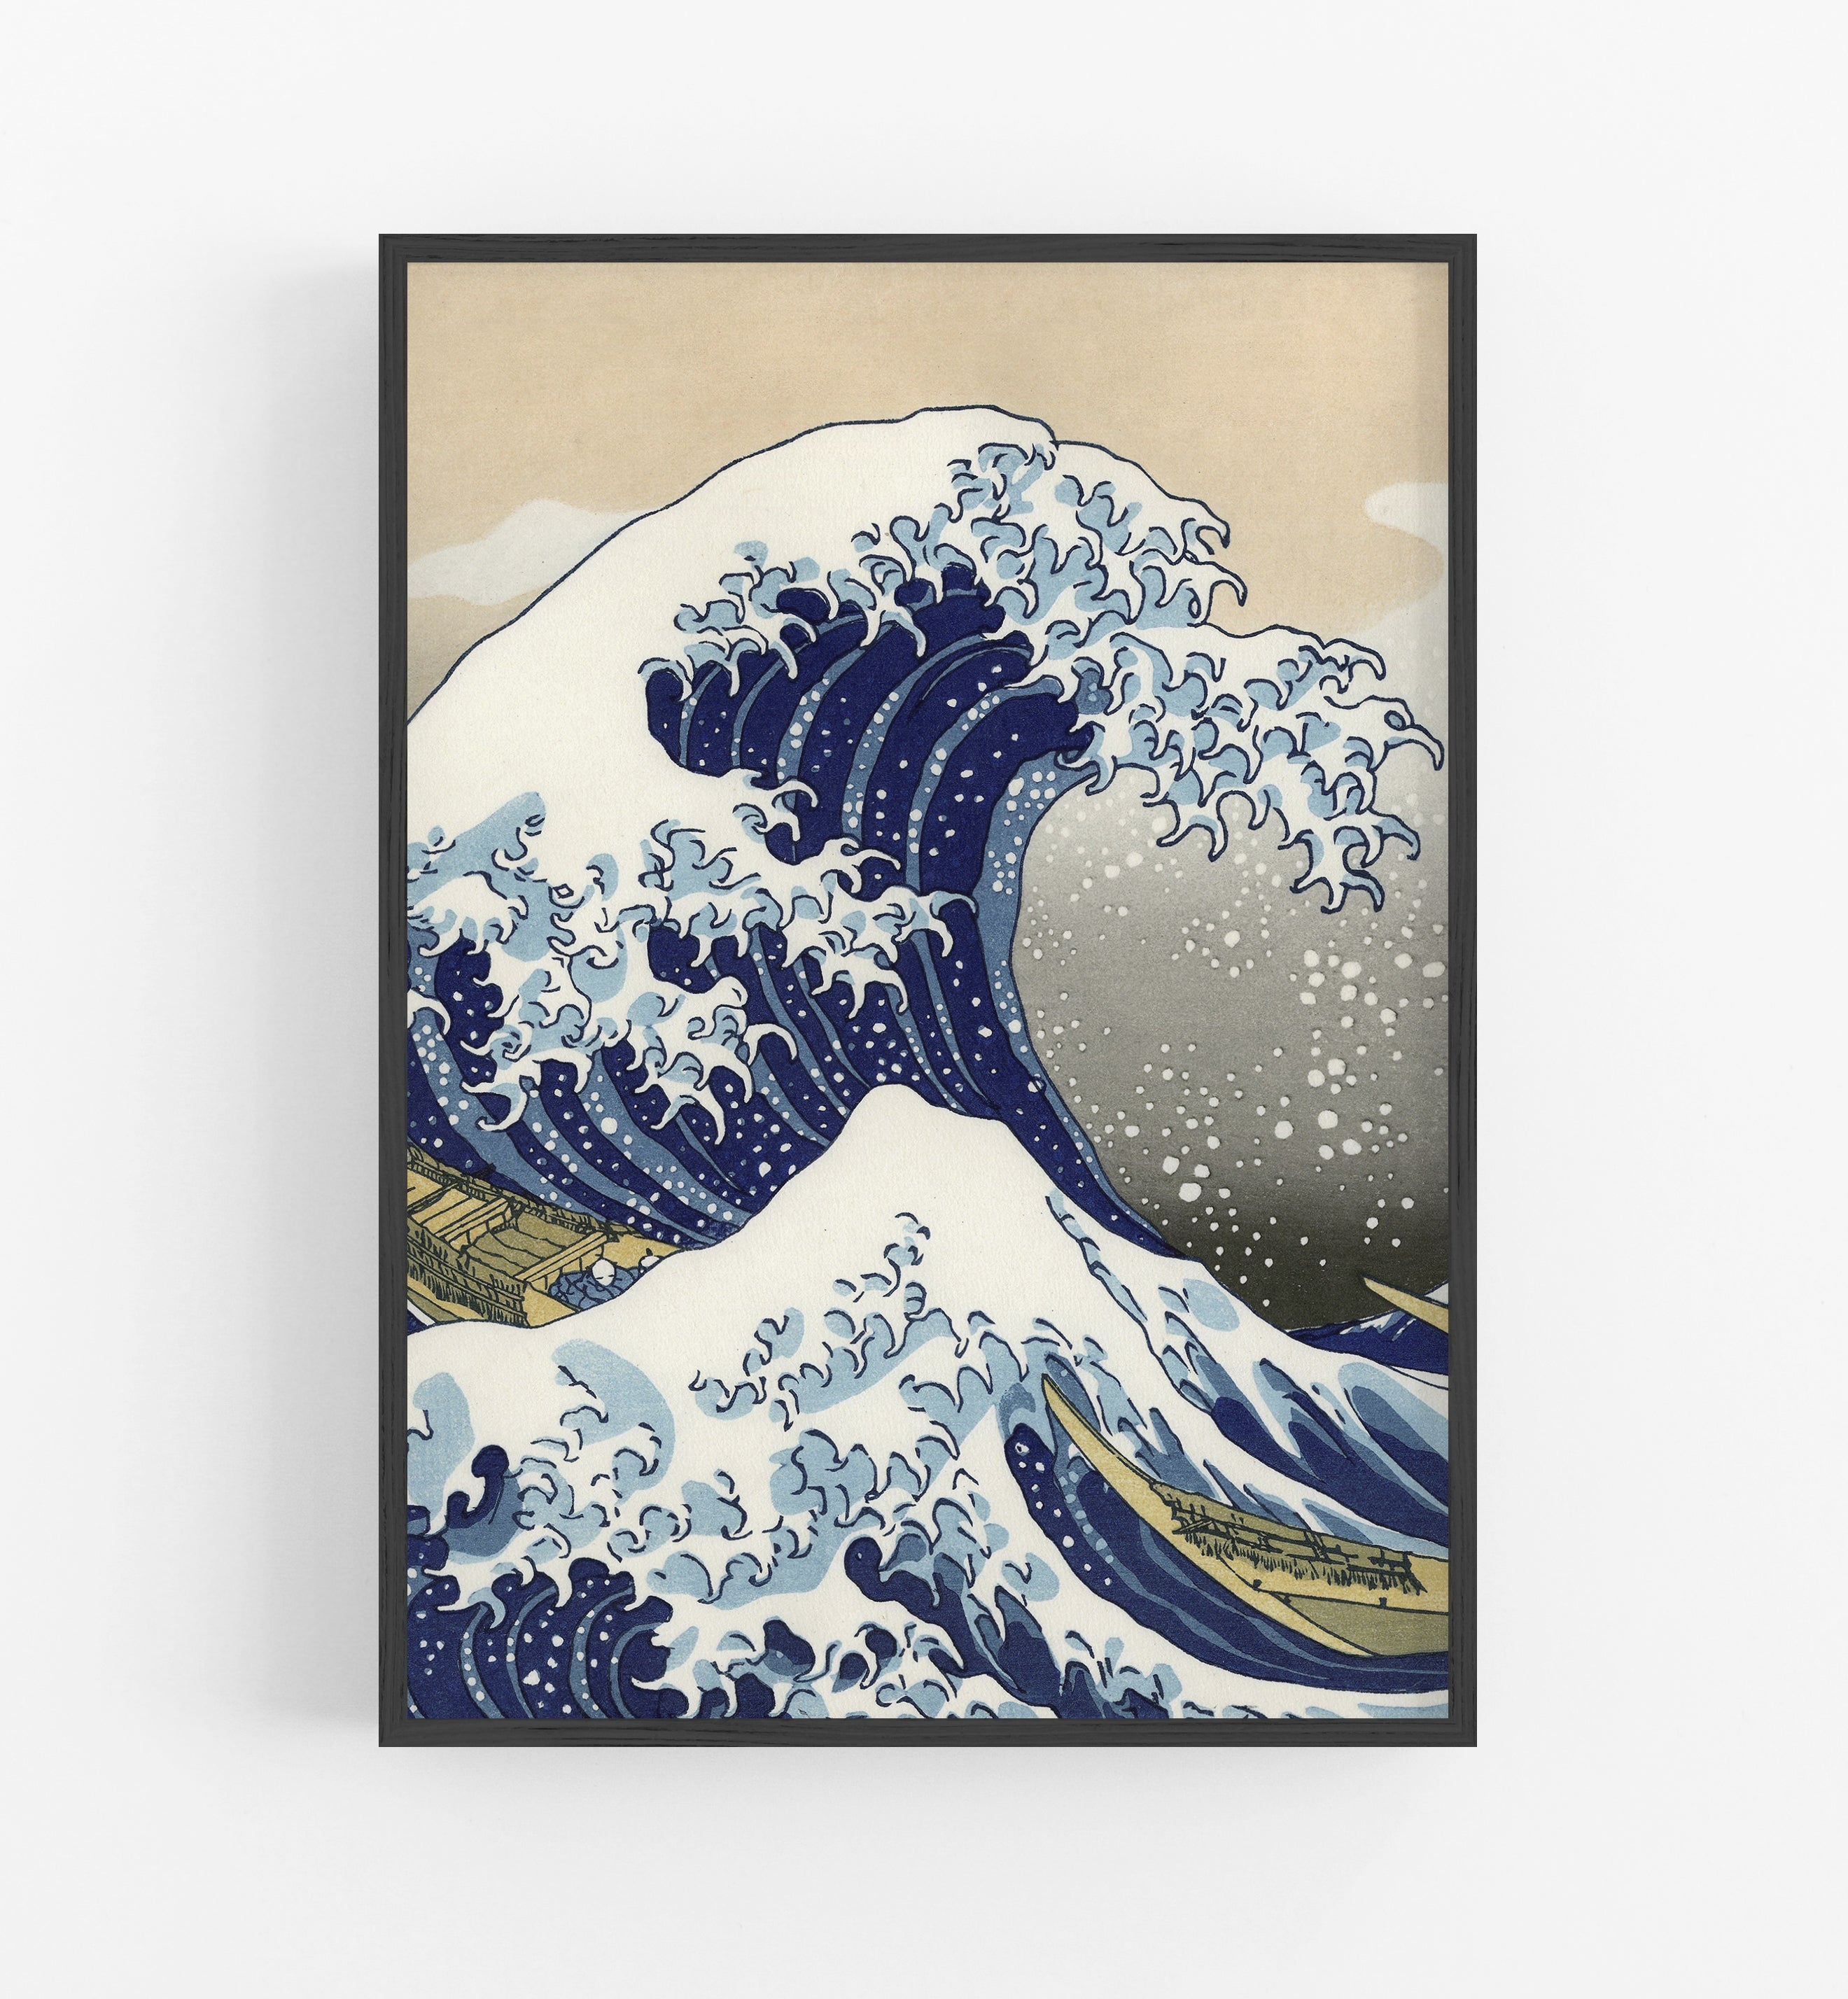 The Great Wave Cut